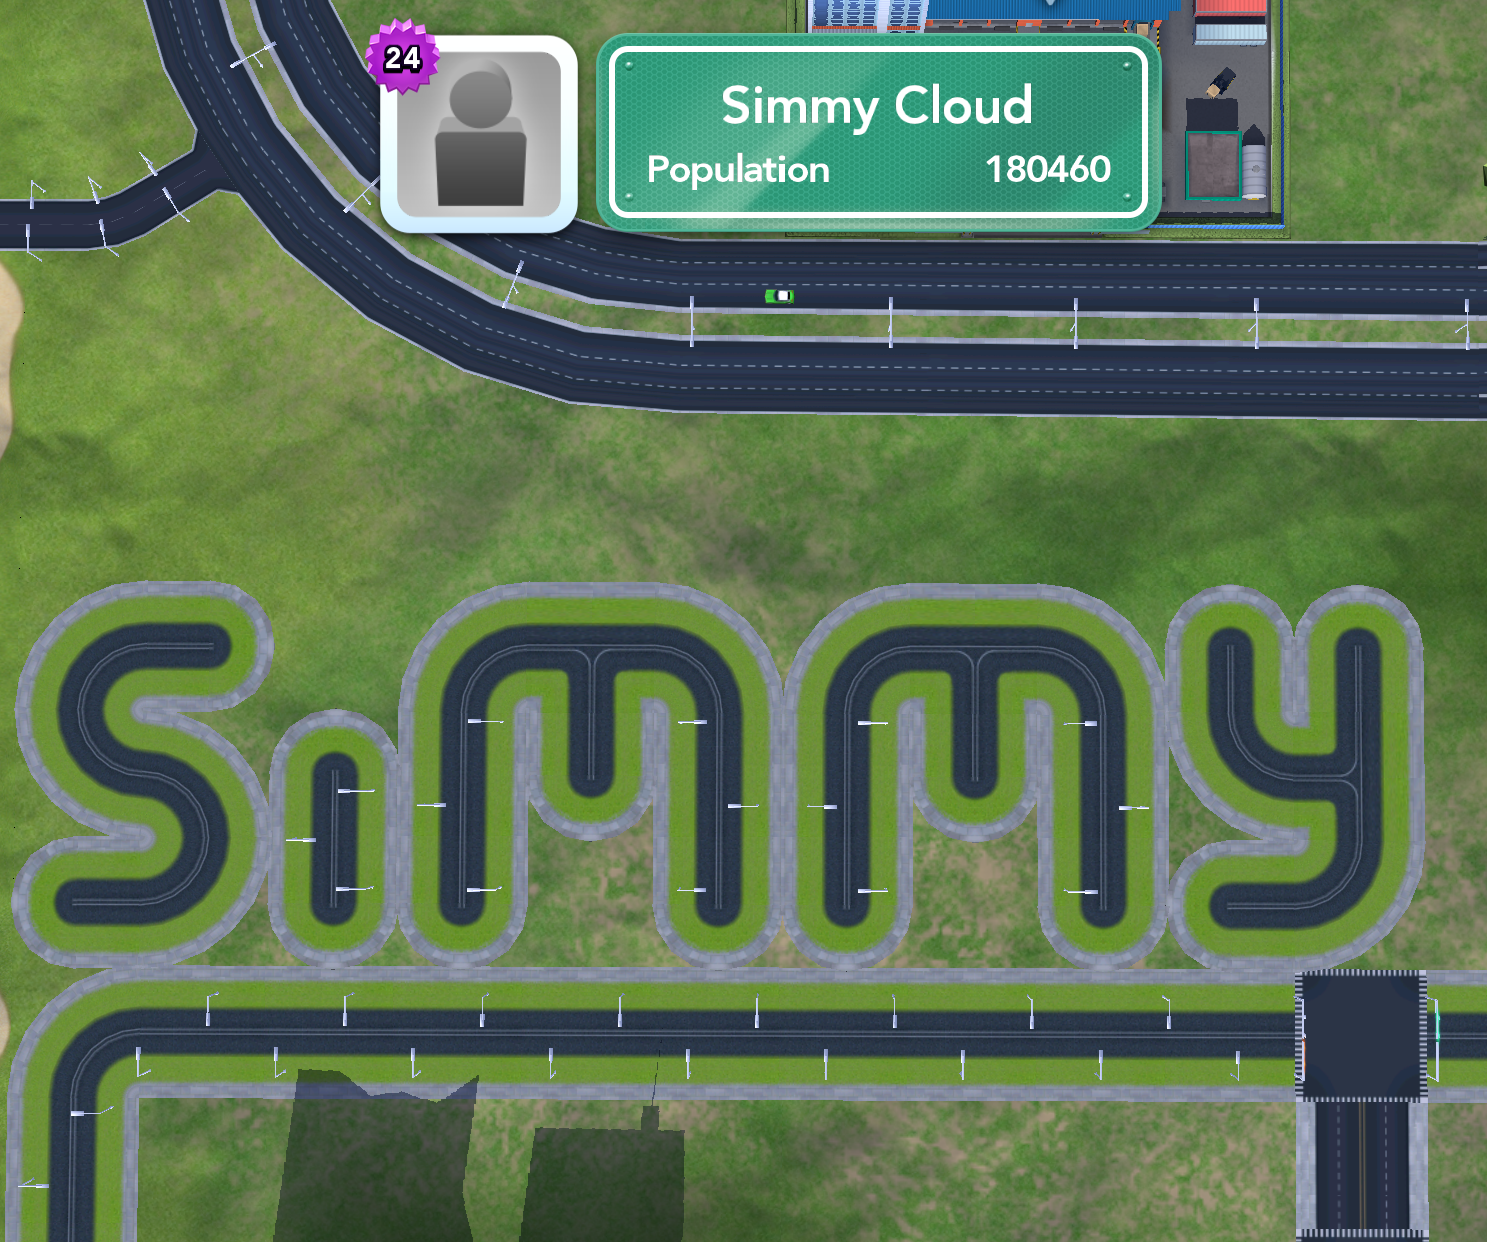 Simcity Buildit Info Guide Optimizing Your Simcity Buildit Layout From Day One